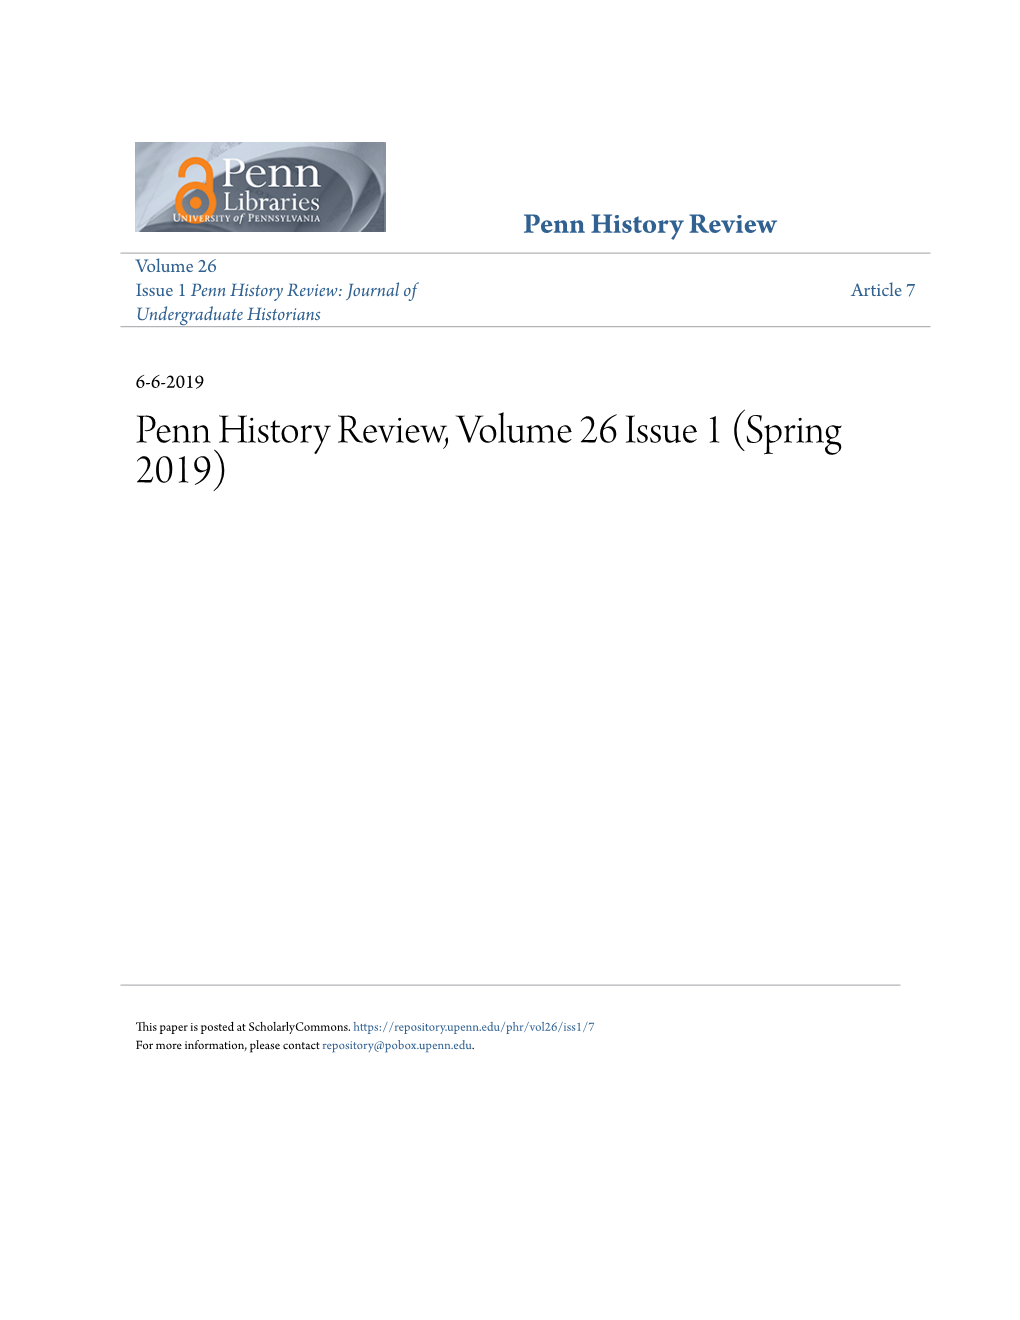 Penn History Review, Volume 26 Issue 1 (Spring 2019)